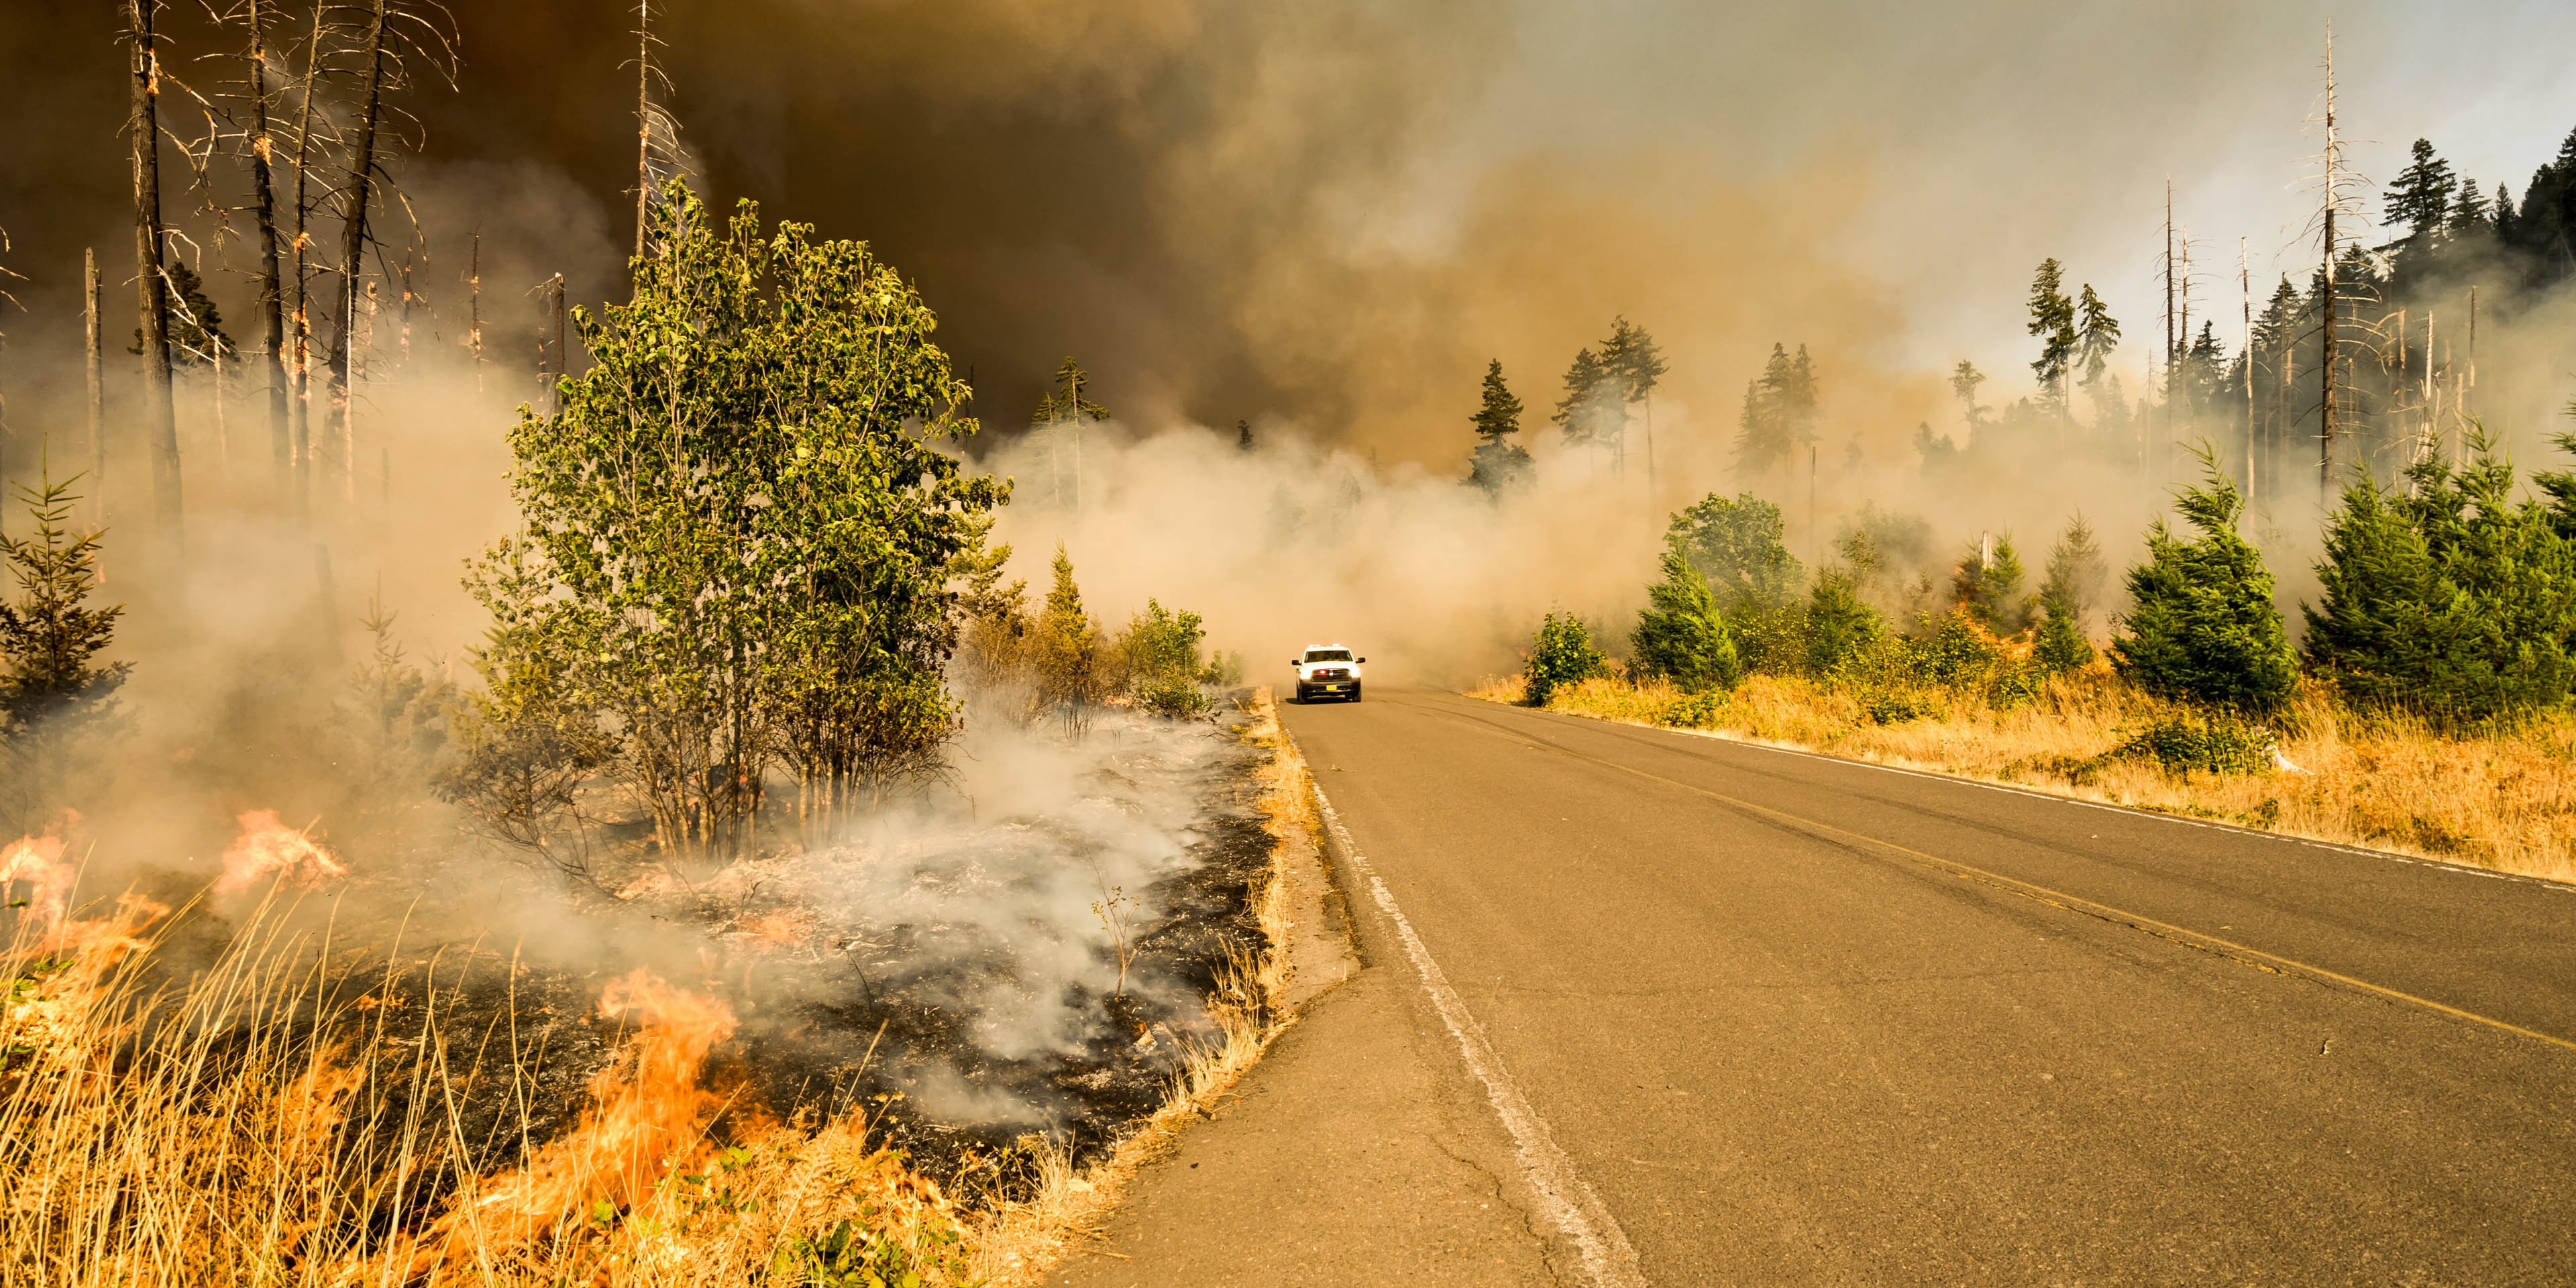 A truck driving on a road surrounded by a wildfire and smoke.